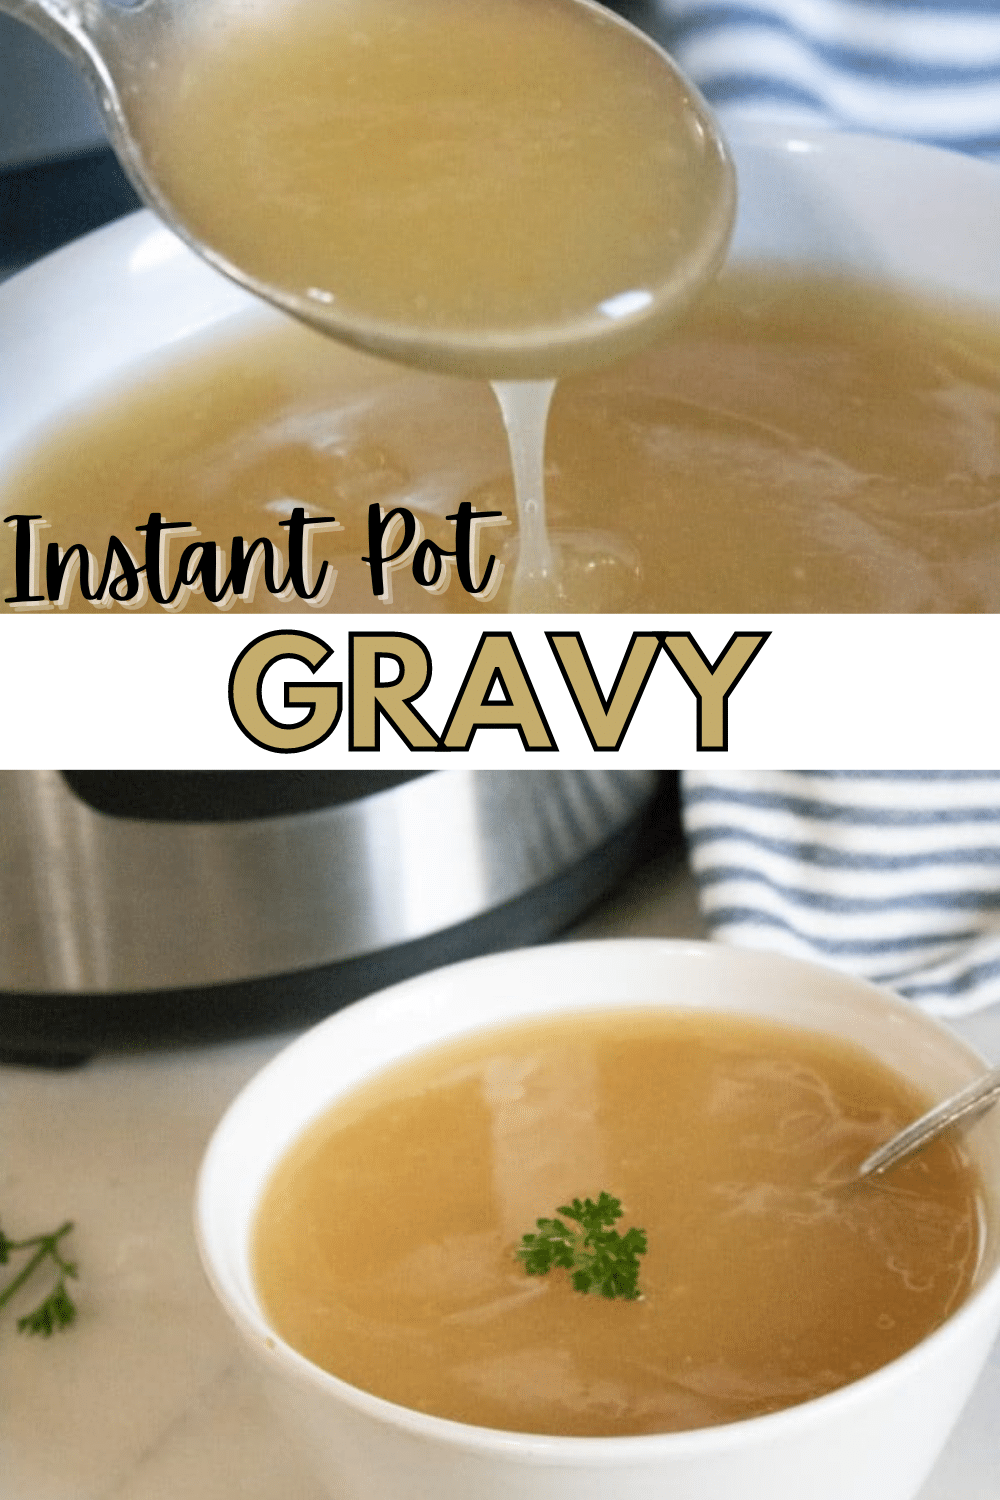     Instant pot gravy served in a bowl with a spoon.